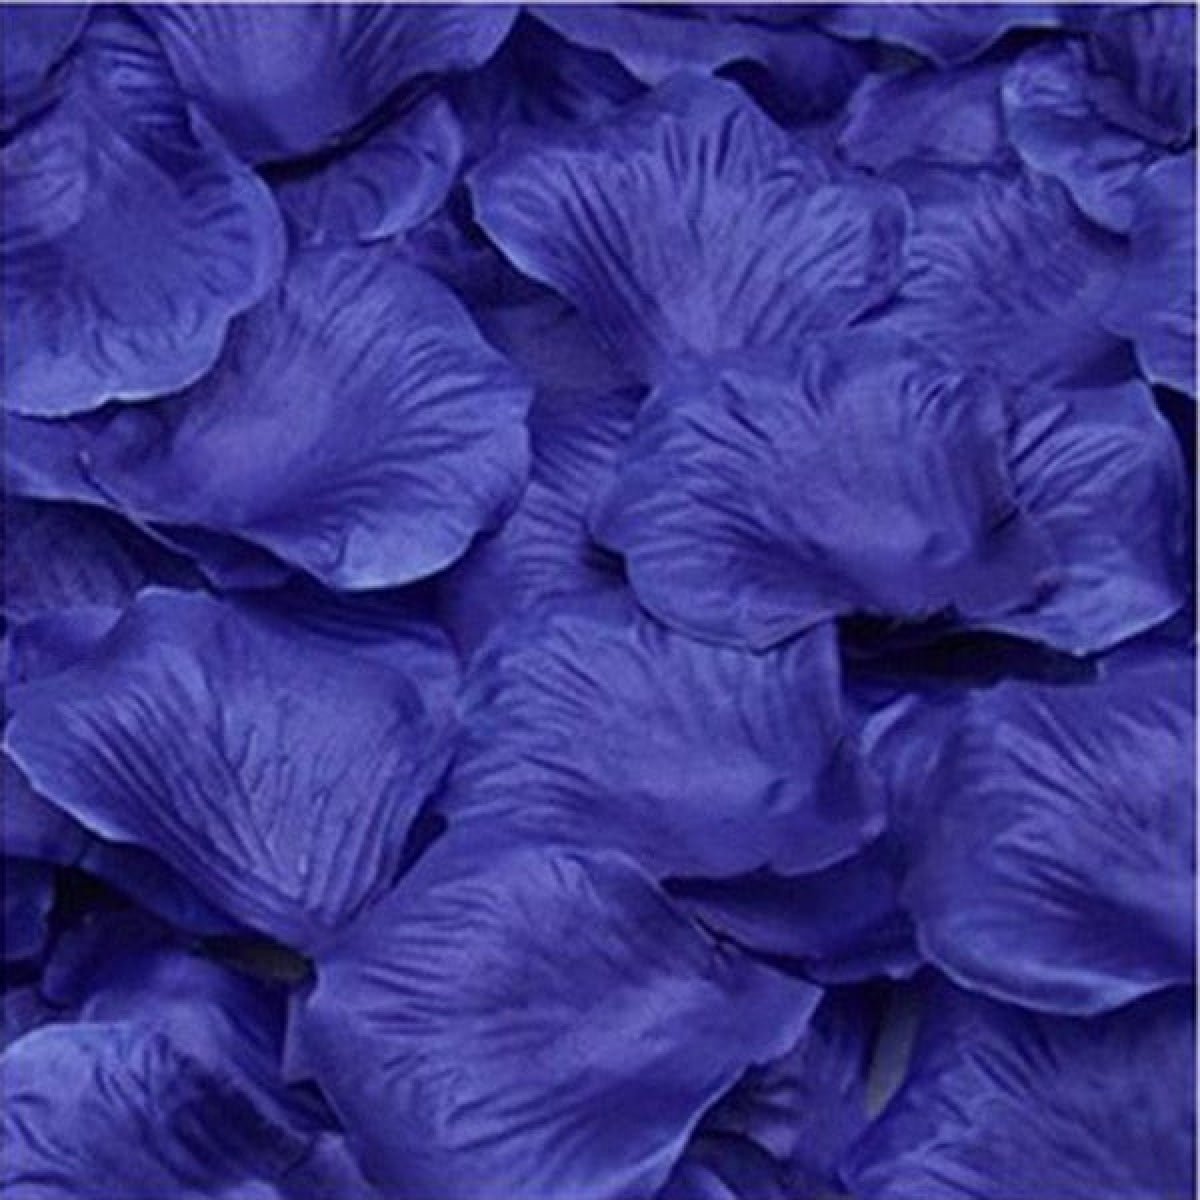 500pcs Rose Petals Flower Artificial Flowers Table Confetti Home Wedding Decorations - Dark Blue - - Asia Sell